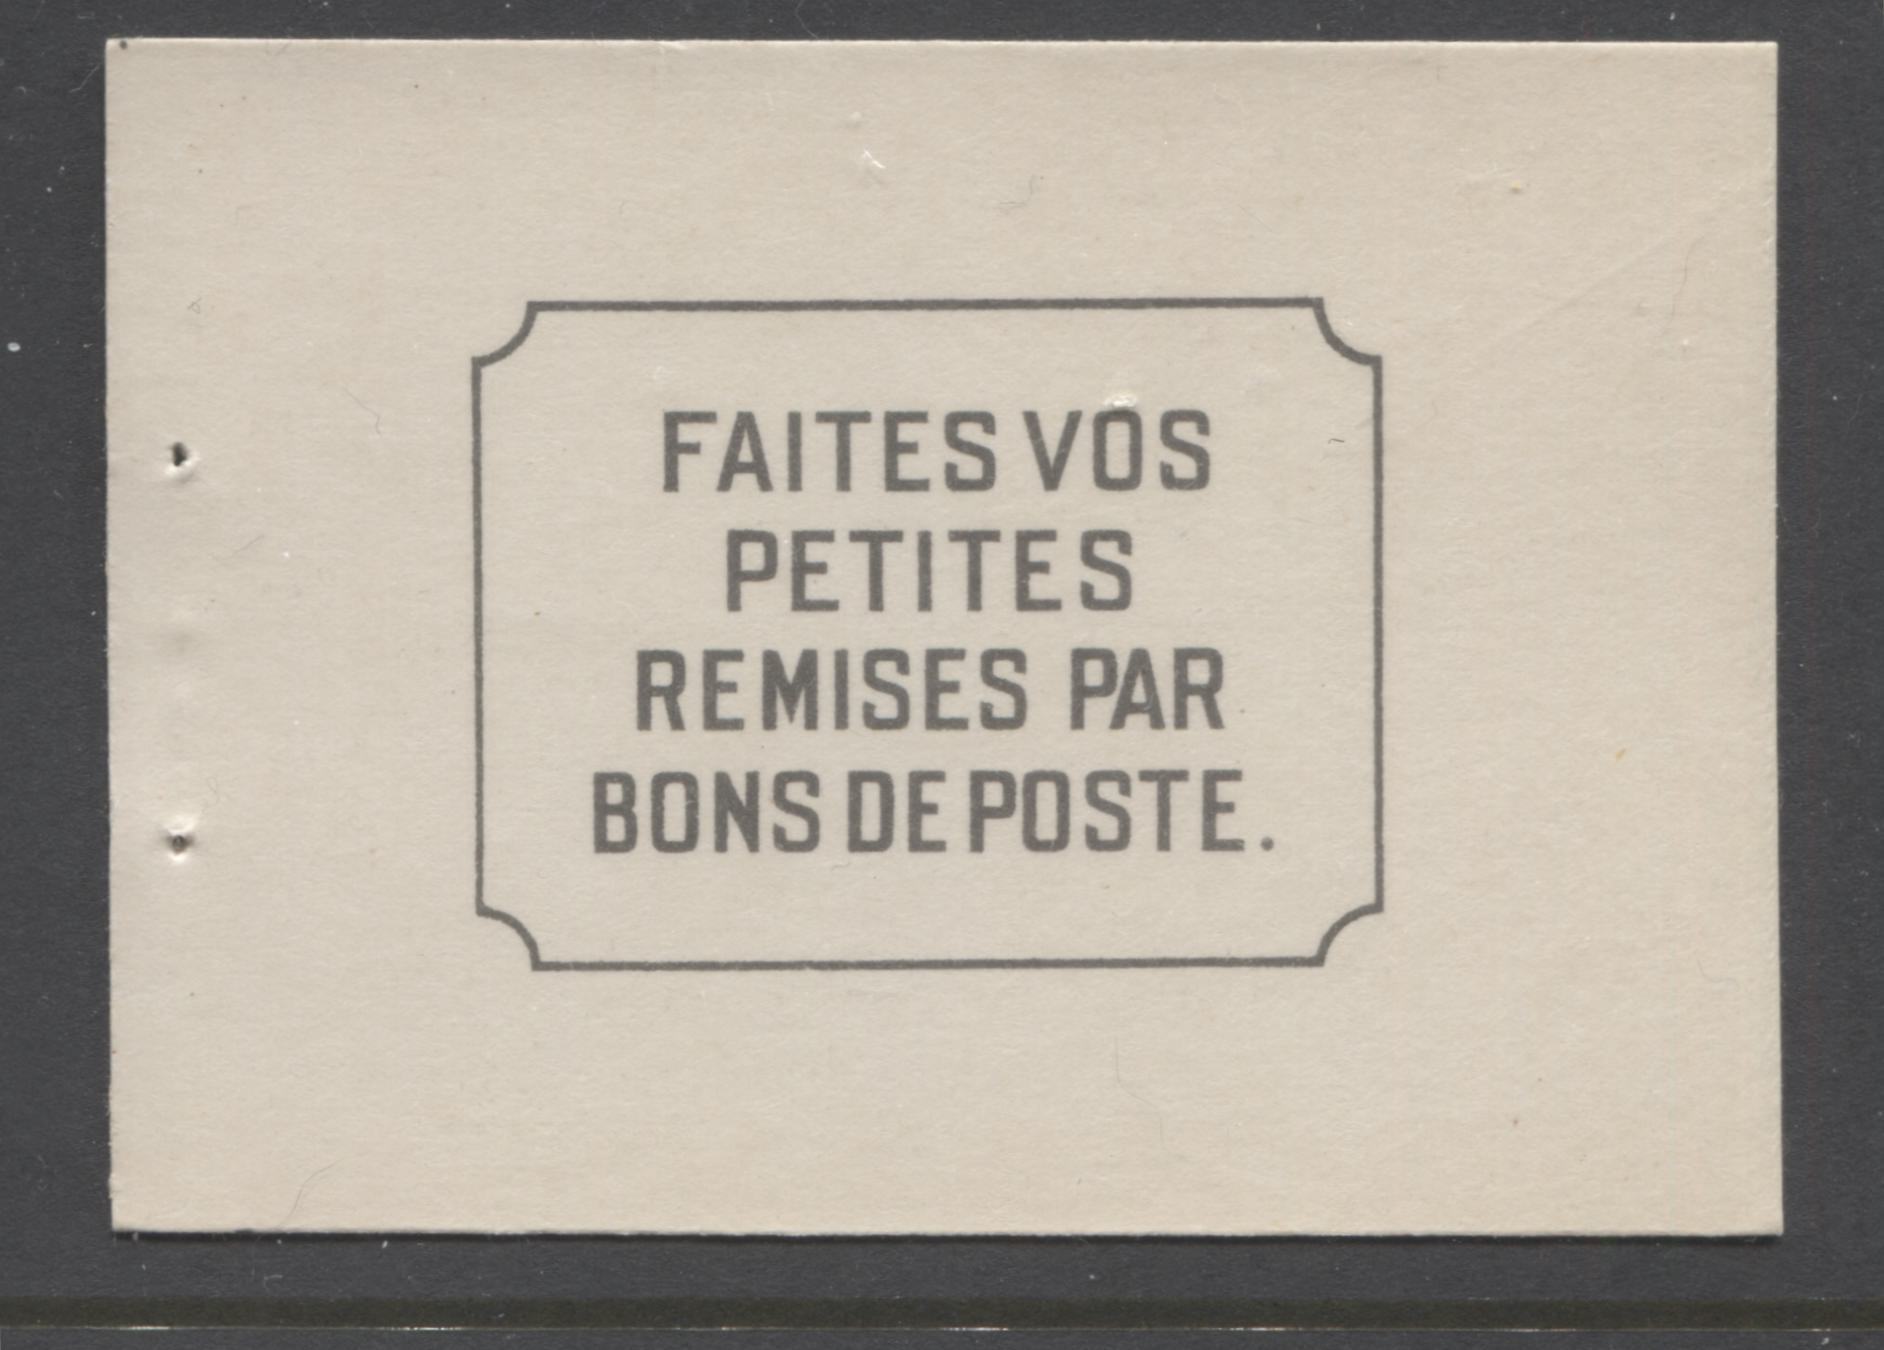 Canada #BK28b 1937-1942 Mufti Issue, Complete 25¢ French Booklet, Smooth Vertical Wove Paper, Type II Covers, Harris Front Cover Type IIj Brixton Chrome 